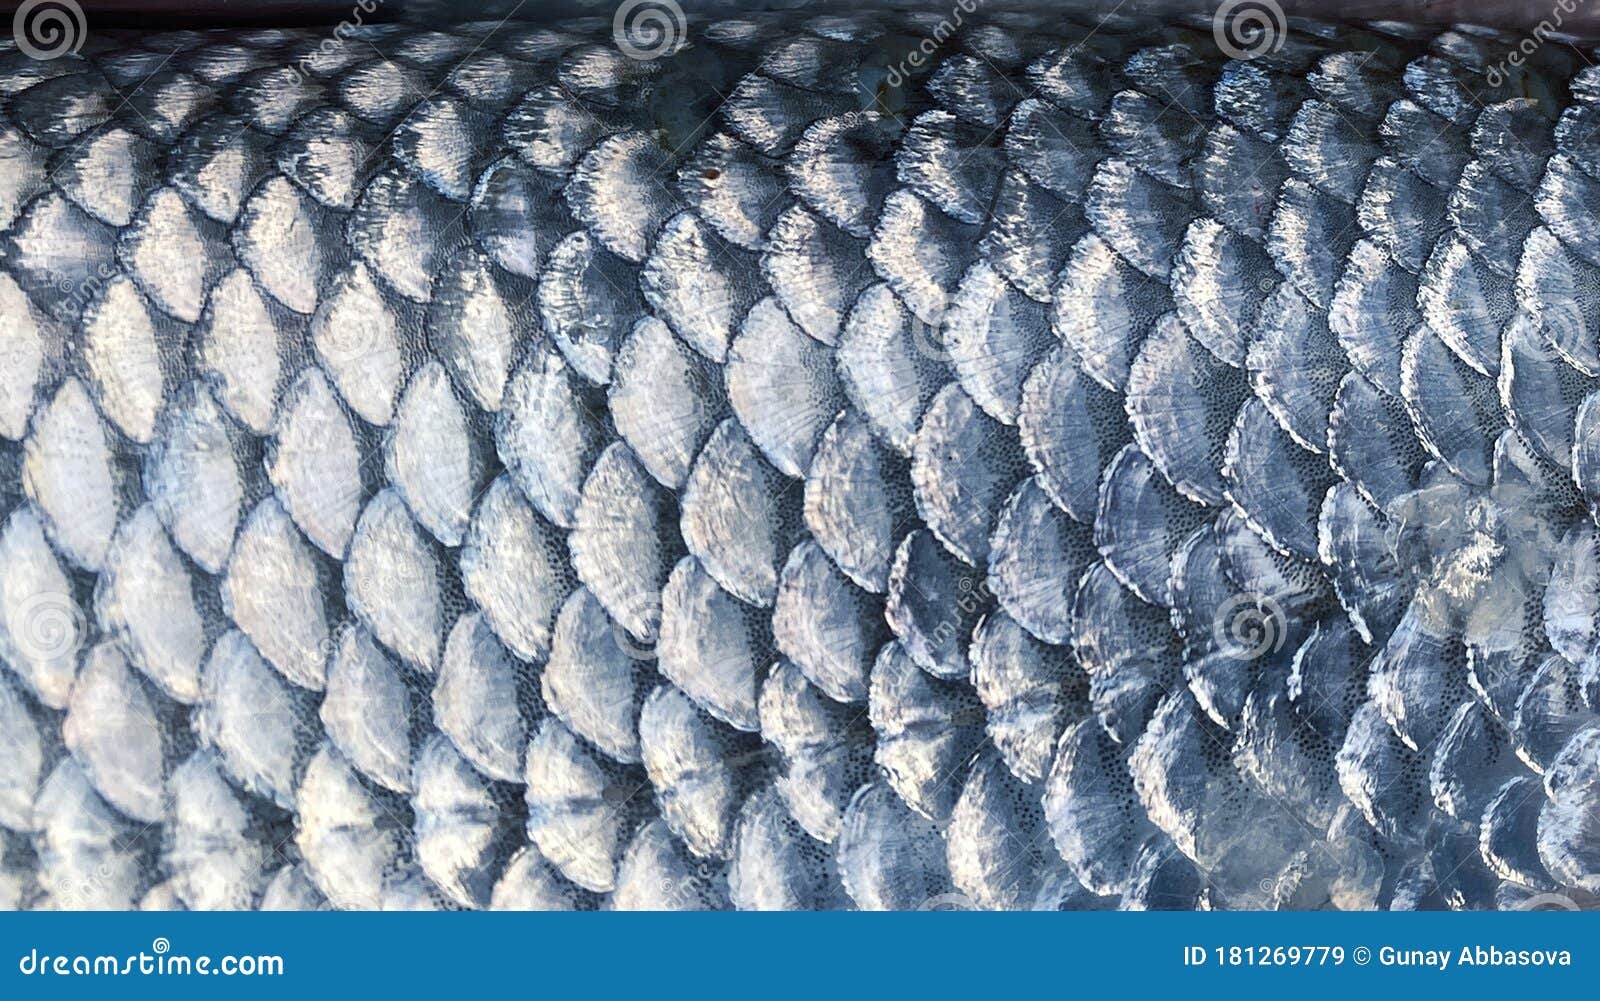 Art Real Walleye Fish Scales Background Stock Image - Image of